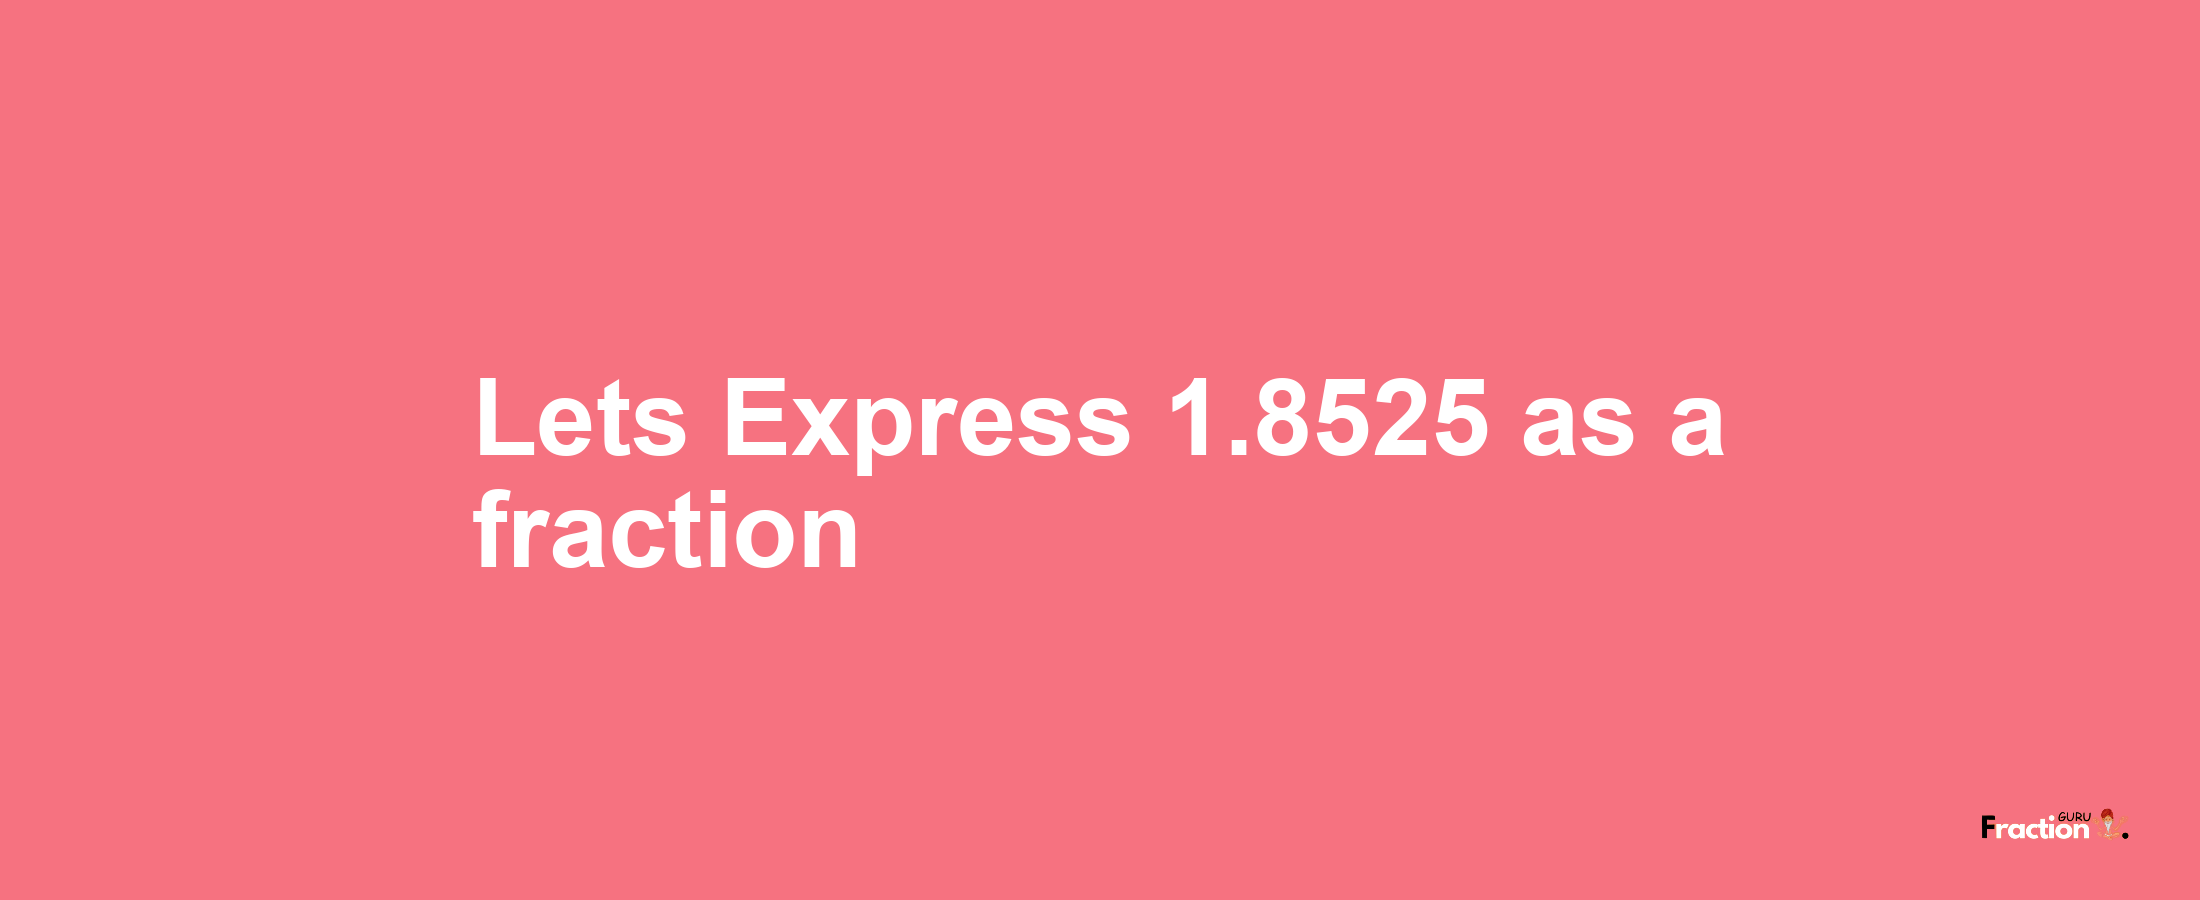 Lets Express 1.8525 as afraction